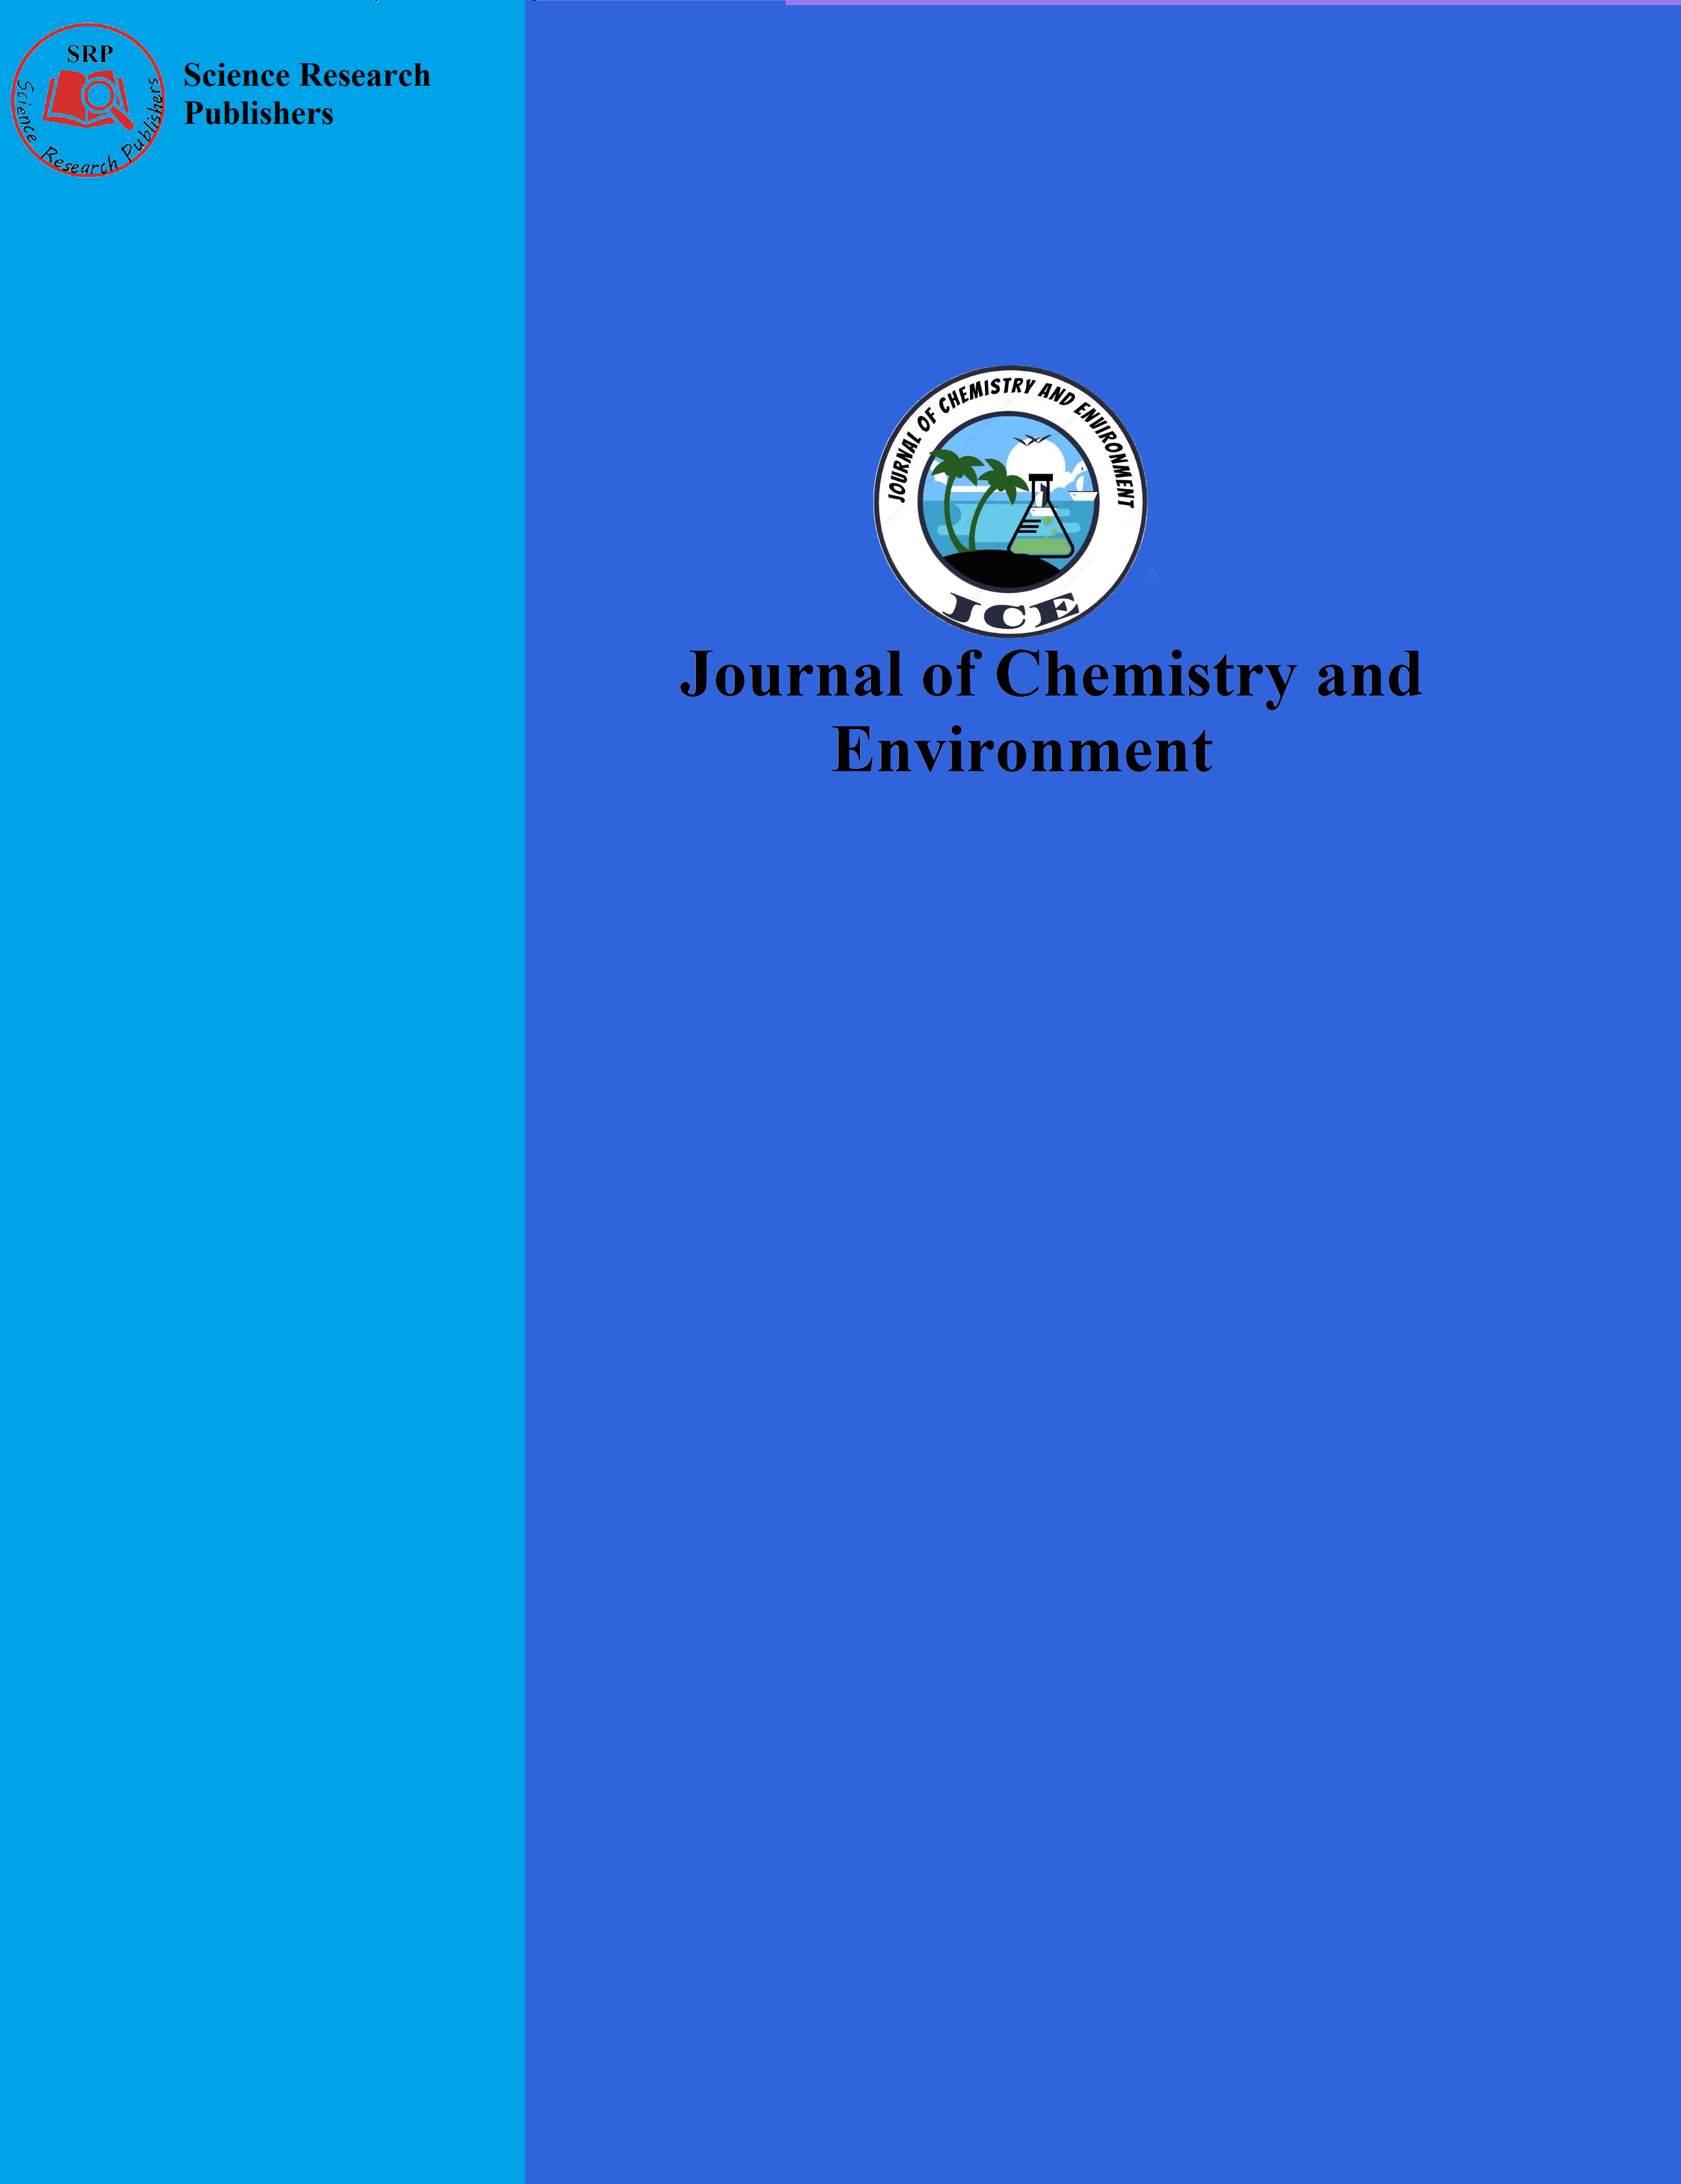 research journal of chemistry and environment website